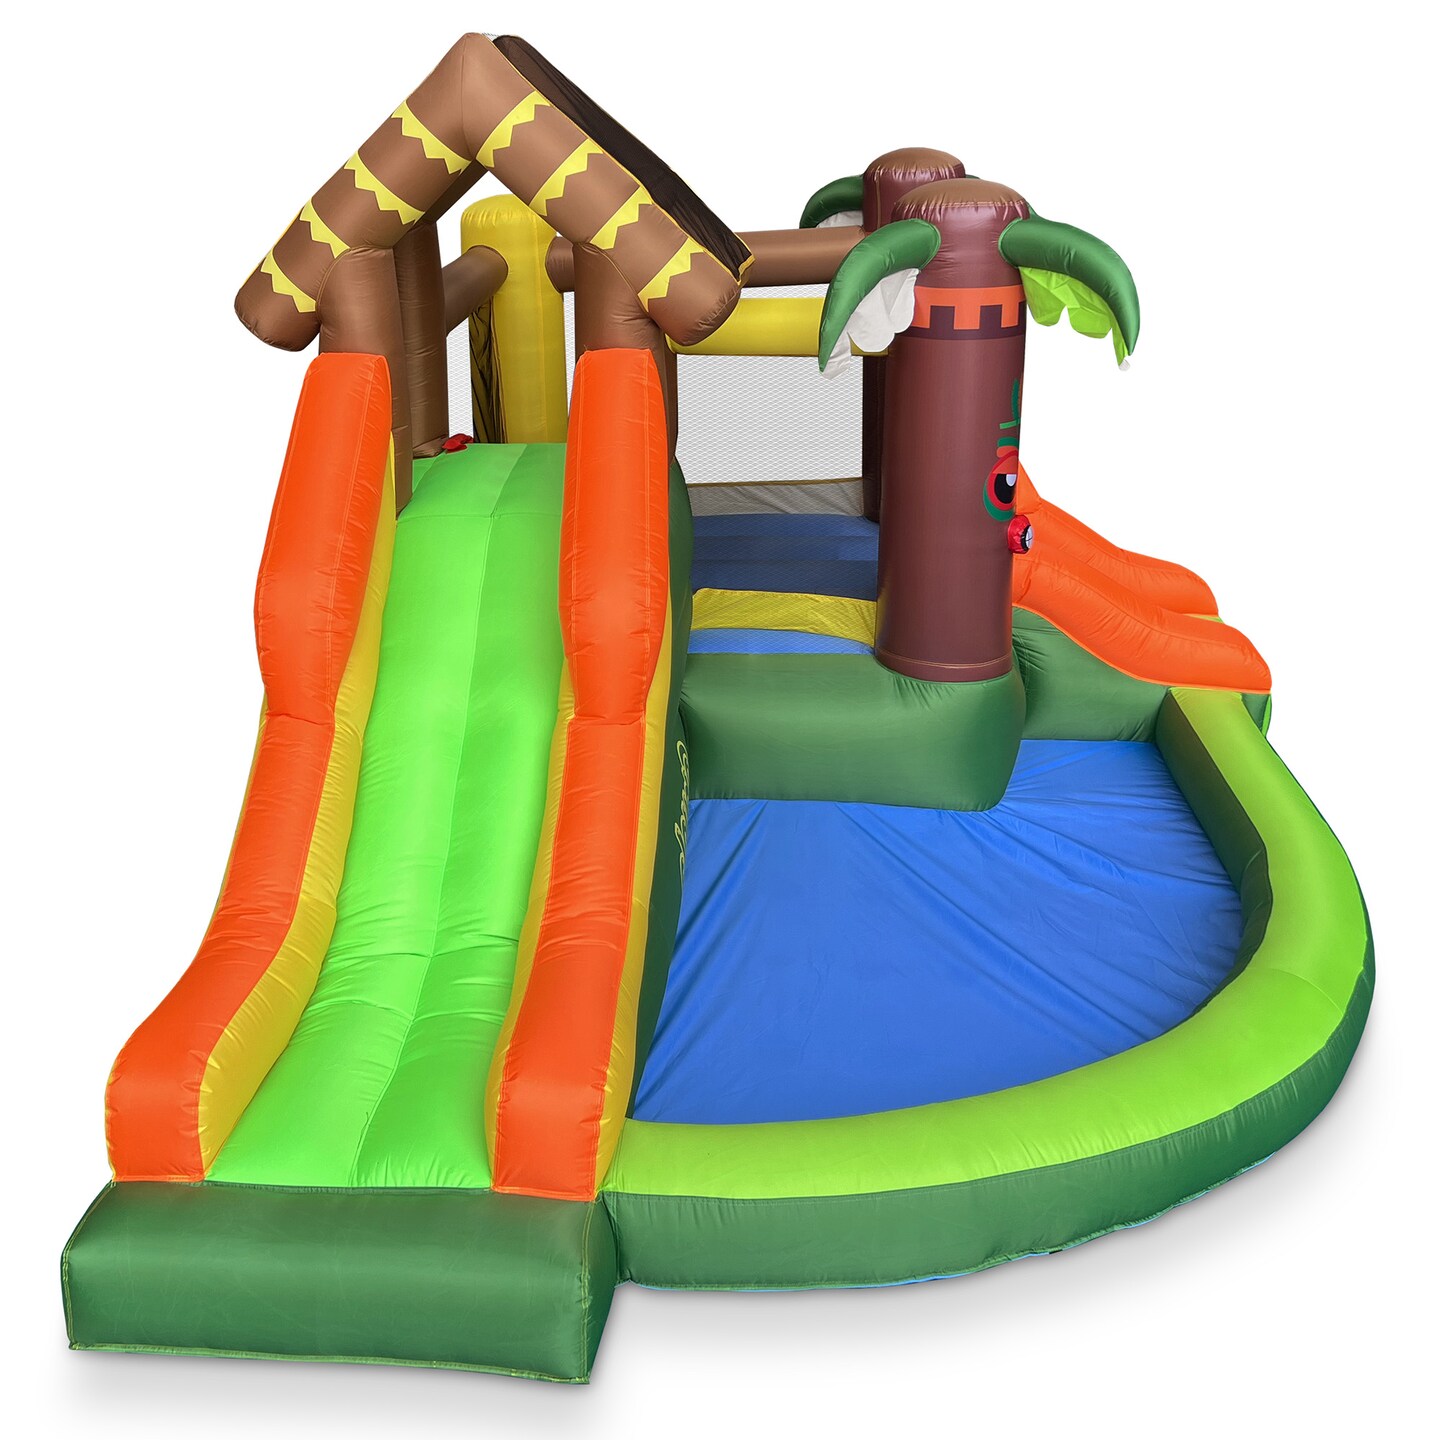 Cloud 9 Inflatable Jungle Bounce House with Blower, Bouncer for Kids with Two Slides, Jumping Area, and Ball Pit